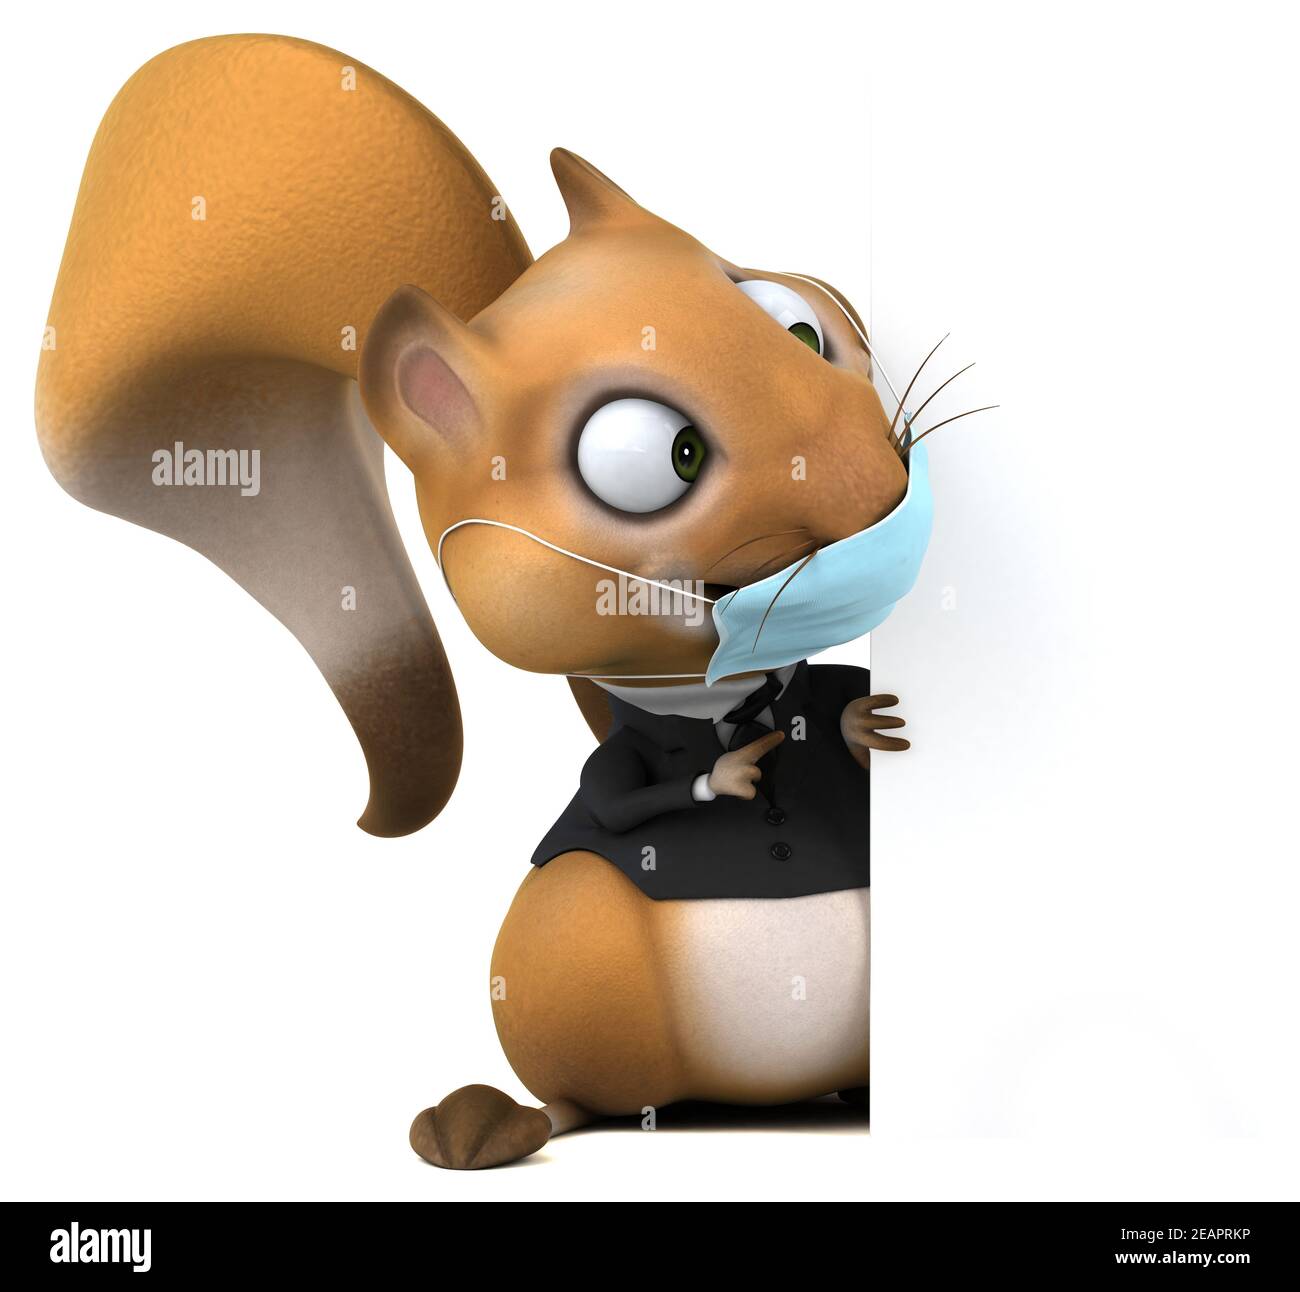 Fun 3D cartoon squirrel with a mask Stock Photo